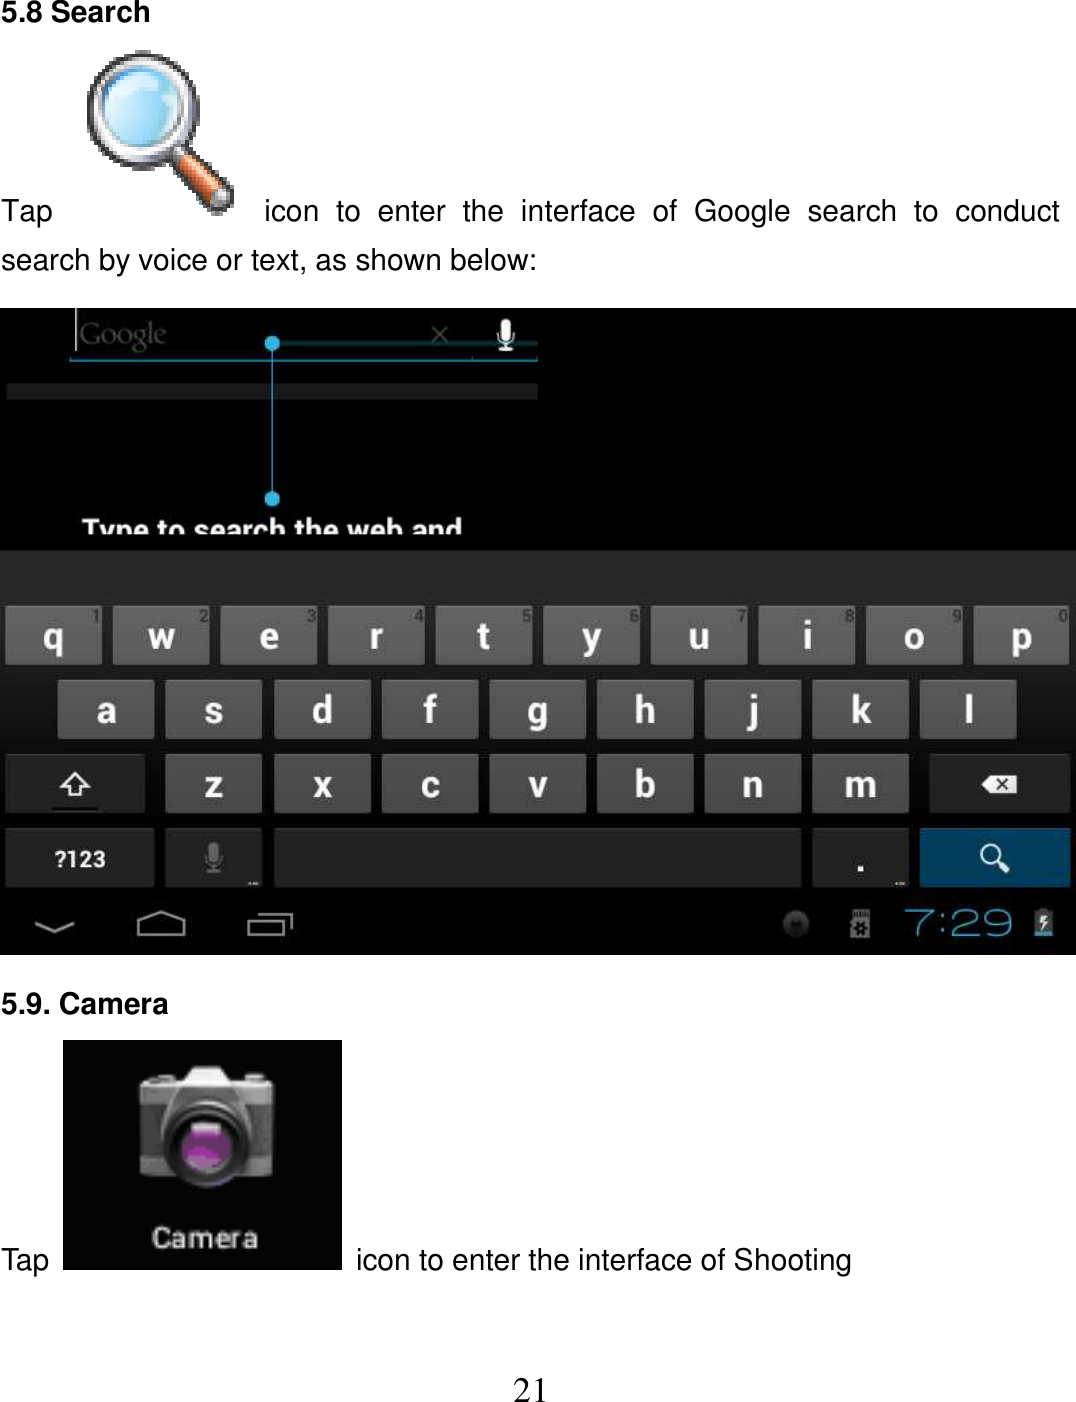   21 5.8 Search Tap    icon  to  enter  the  interface  of  Google  search  to  conduct search by voice or text, as shown below:    5.9. Camera Tap    icon to enter the interface of Shooting  